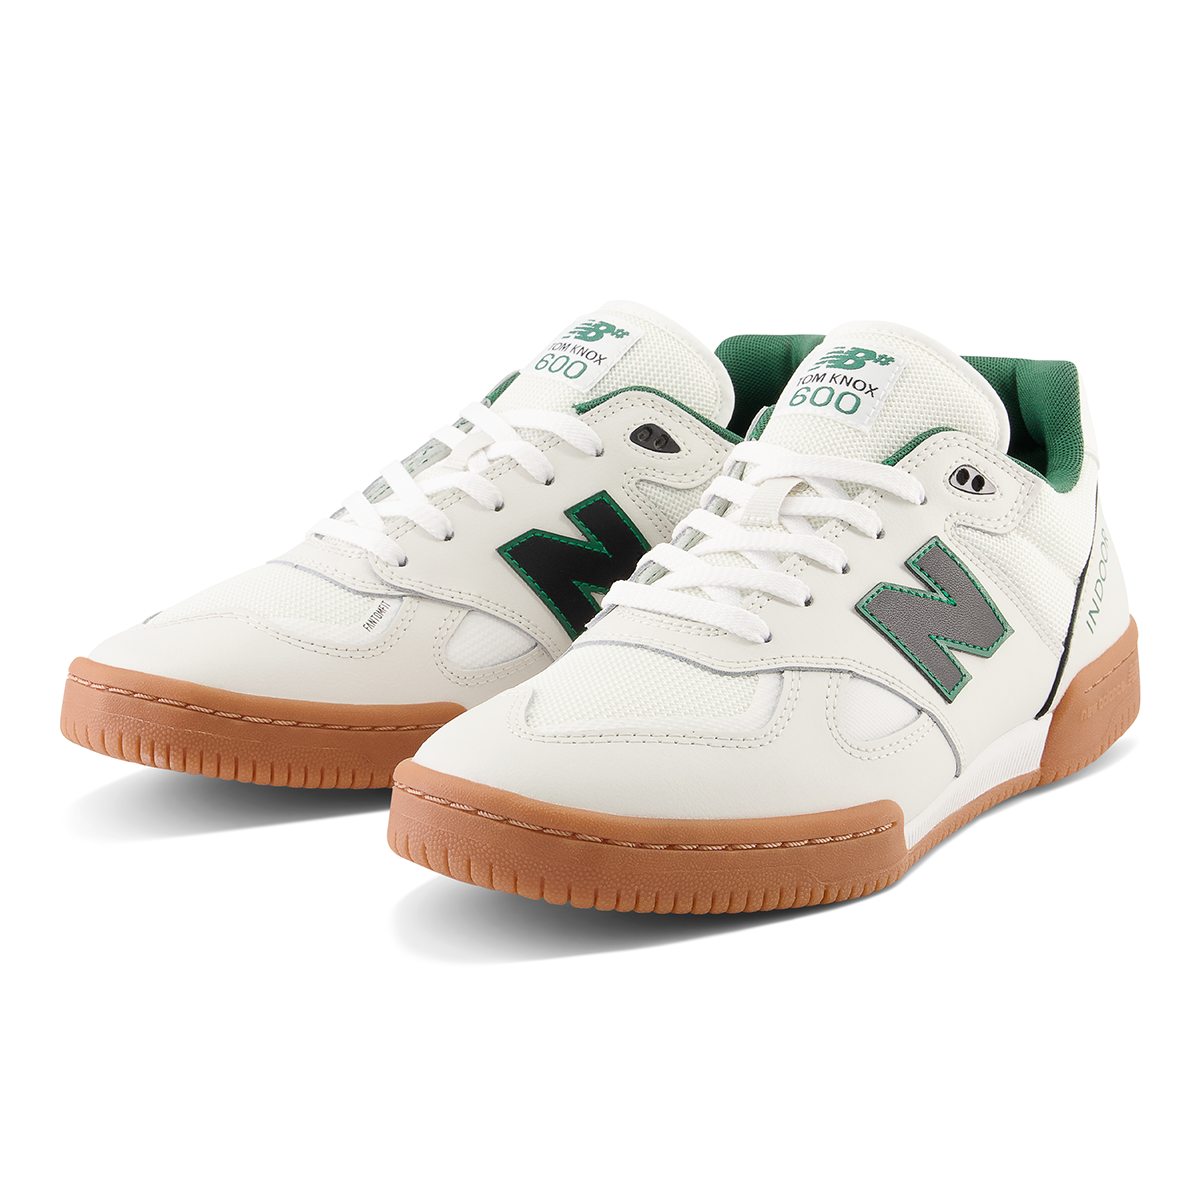 New Balance NM 600 Shoes - White/Green